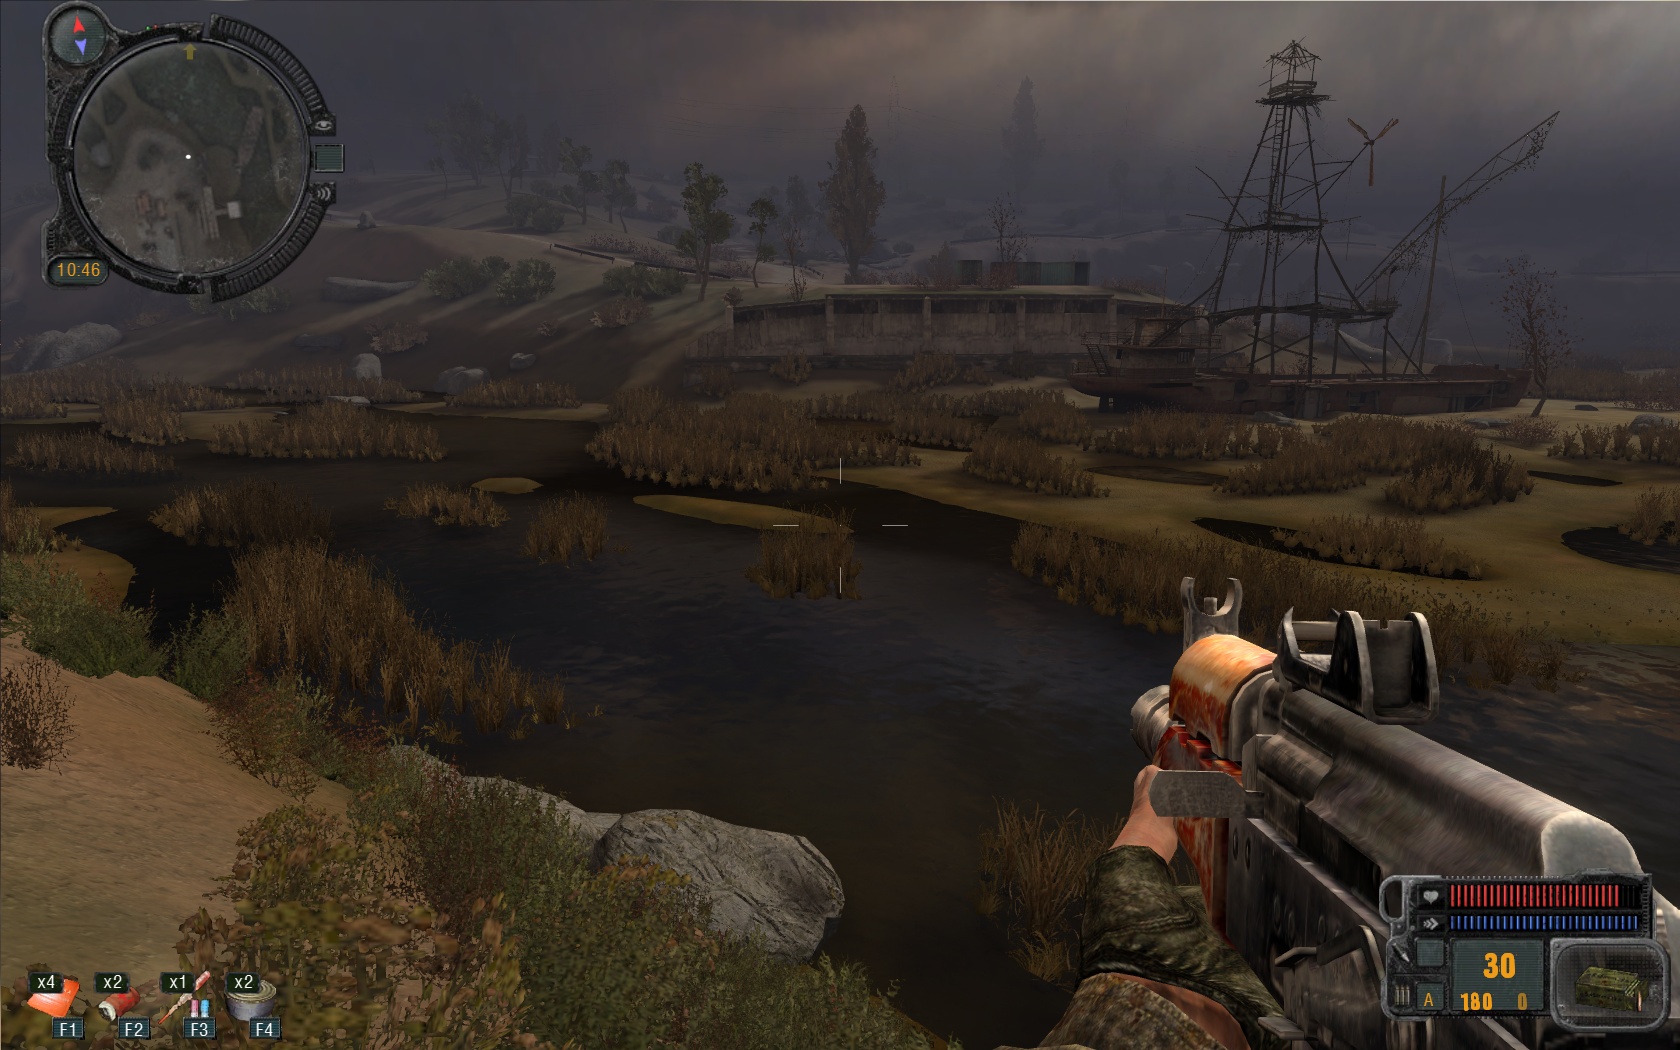 Screenshot of the game “S.T.A.L.K.E.R.: Call of Pripyat” showing the player holding an automatic weapon